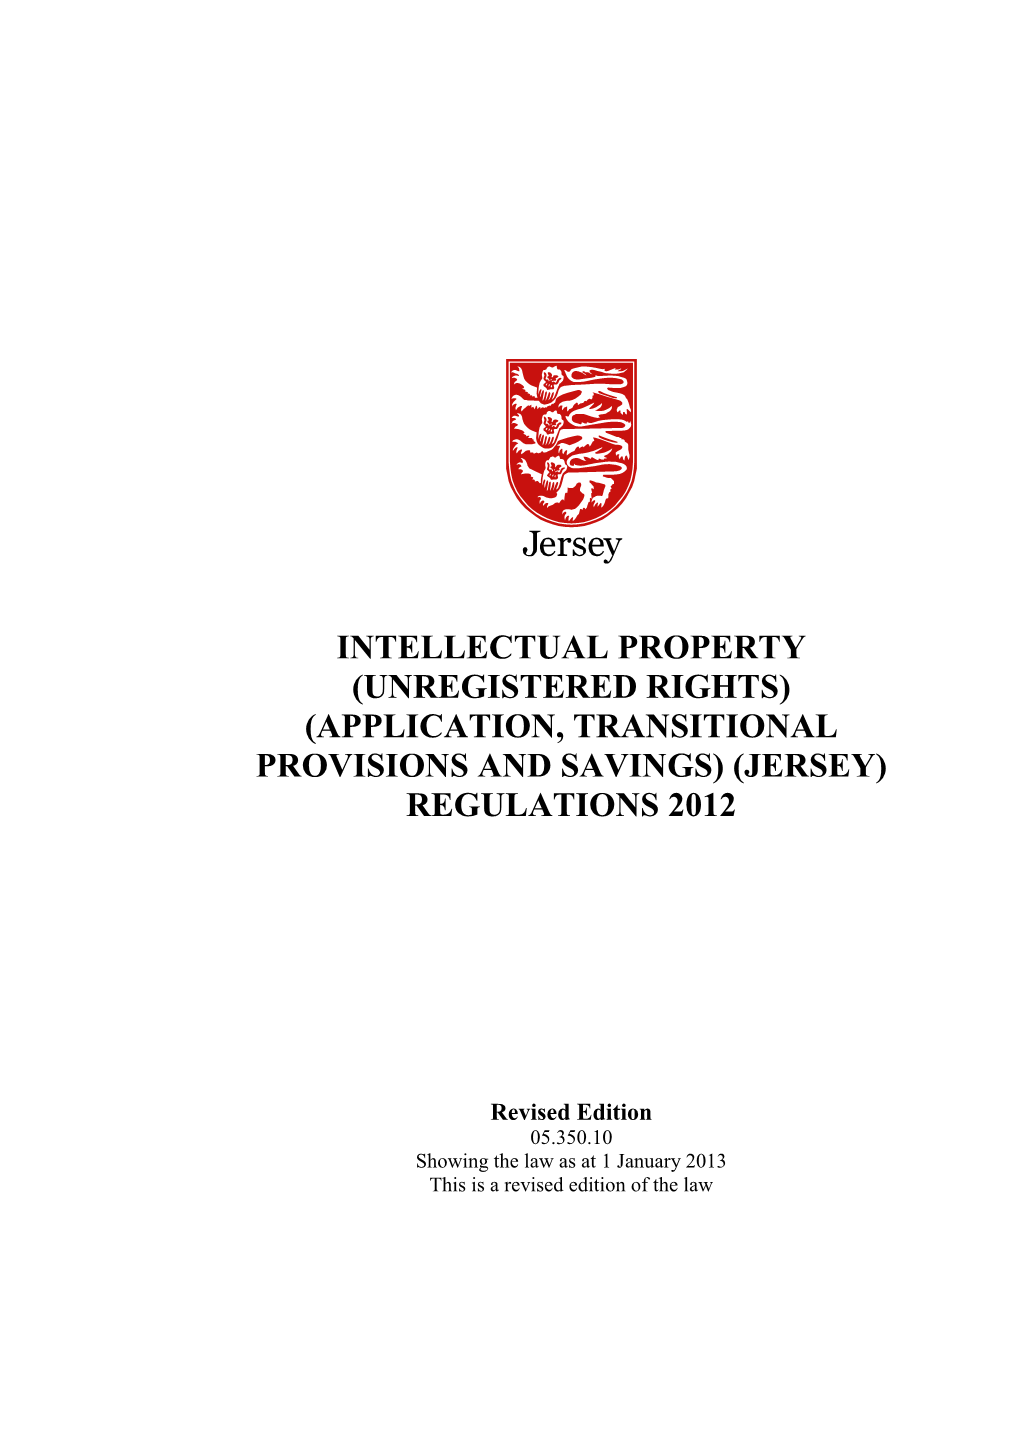 Intellectual Property (Unregistered Rights) (Application, Transitional Provisions and Savings) (Jersey) Regulations 2012